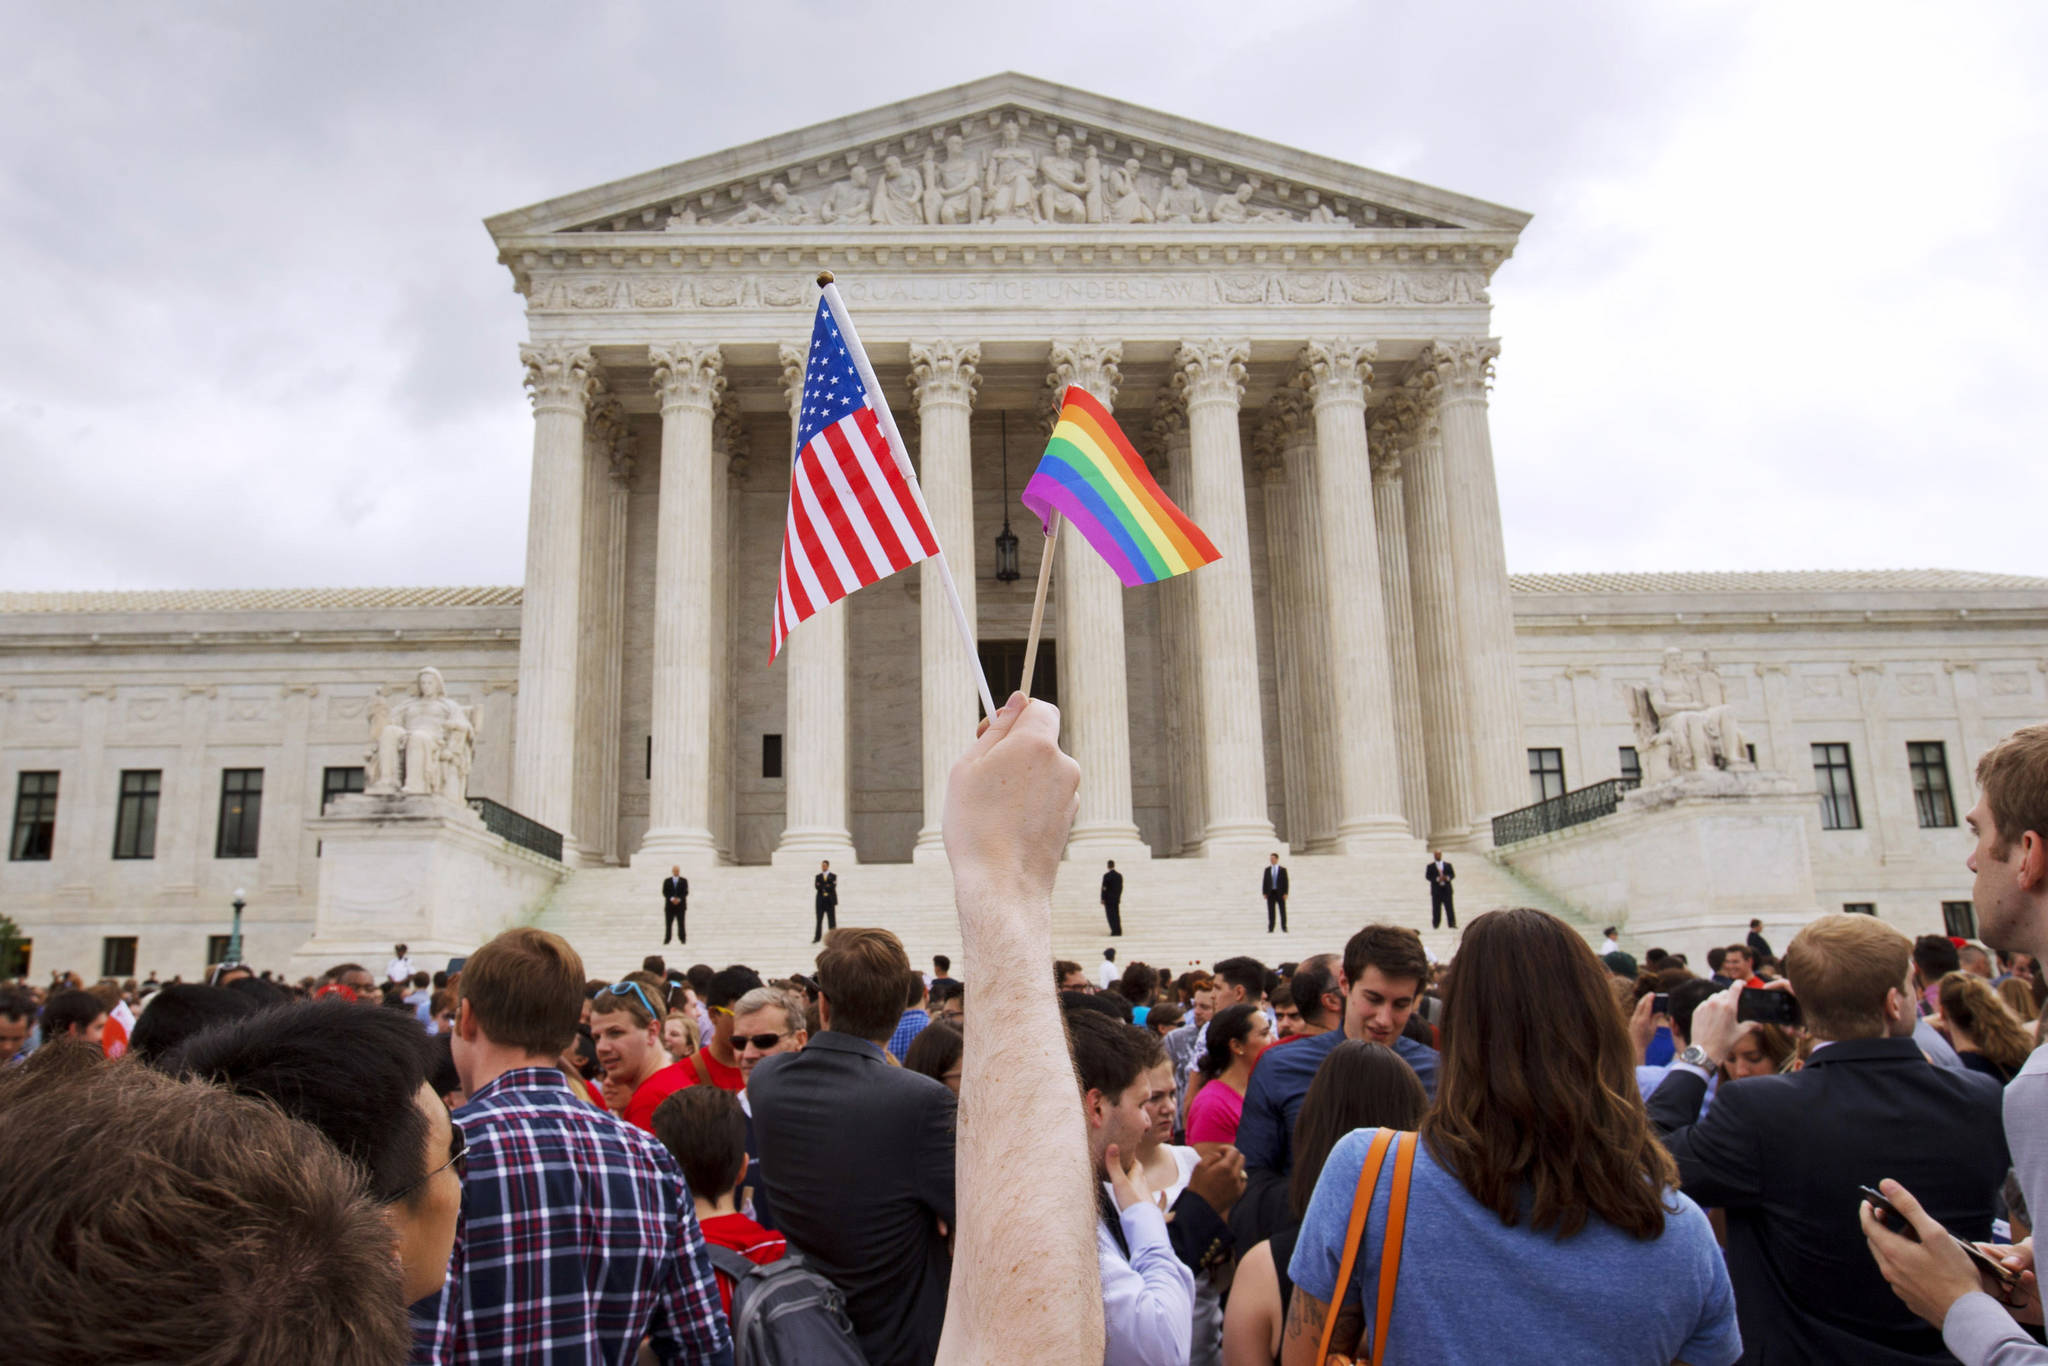 A man holds a U.S. and a rainbow flag outside the Supreme Court in Washington in 2015 after the court legalized gay marriage nationwide. Court documents show the state of Alaska for years maintains a discriminatory policy that denied some same-sex spouses benefits by wrongly claiming gay marriage was not recognized in Alaska, long after courts ordered they be recognized. (AP Photo / Jacquelyn Martin)